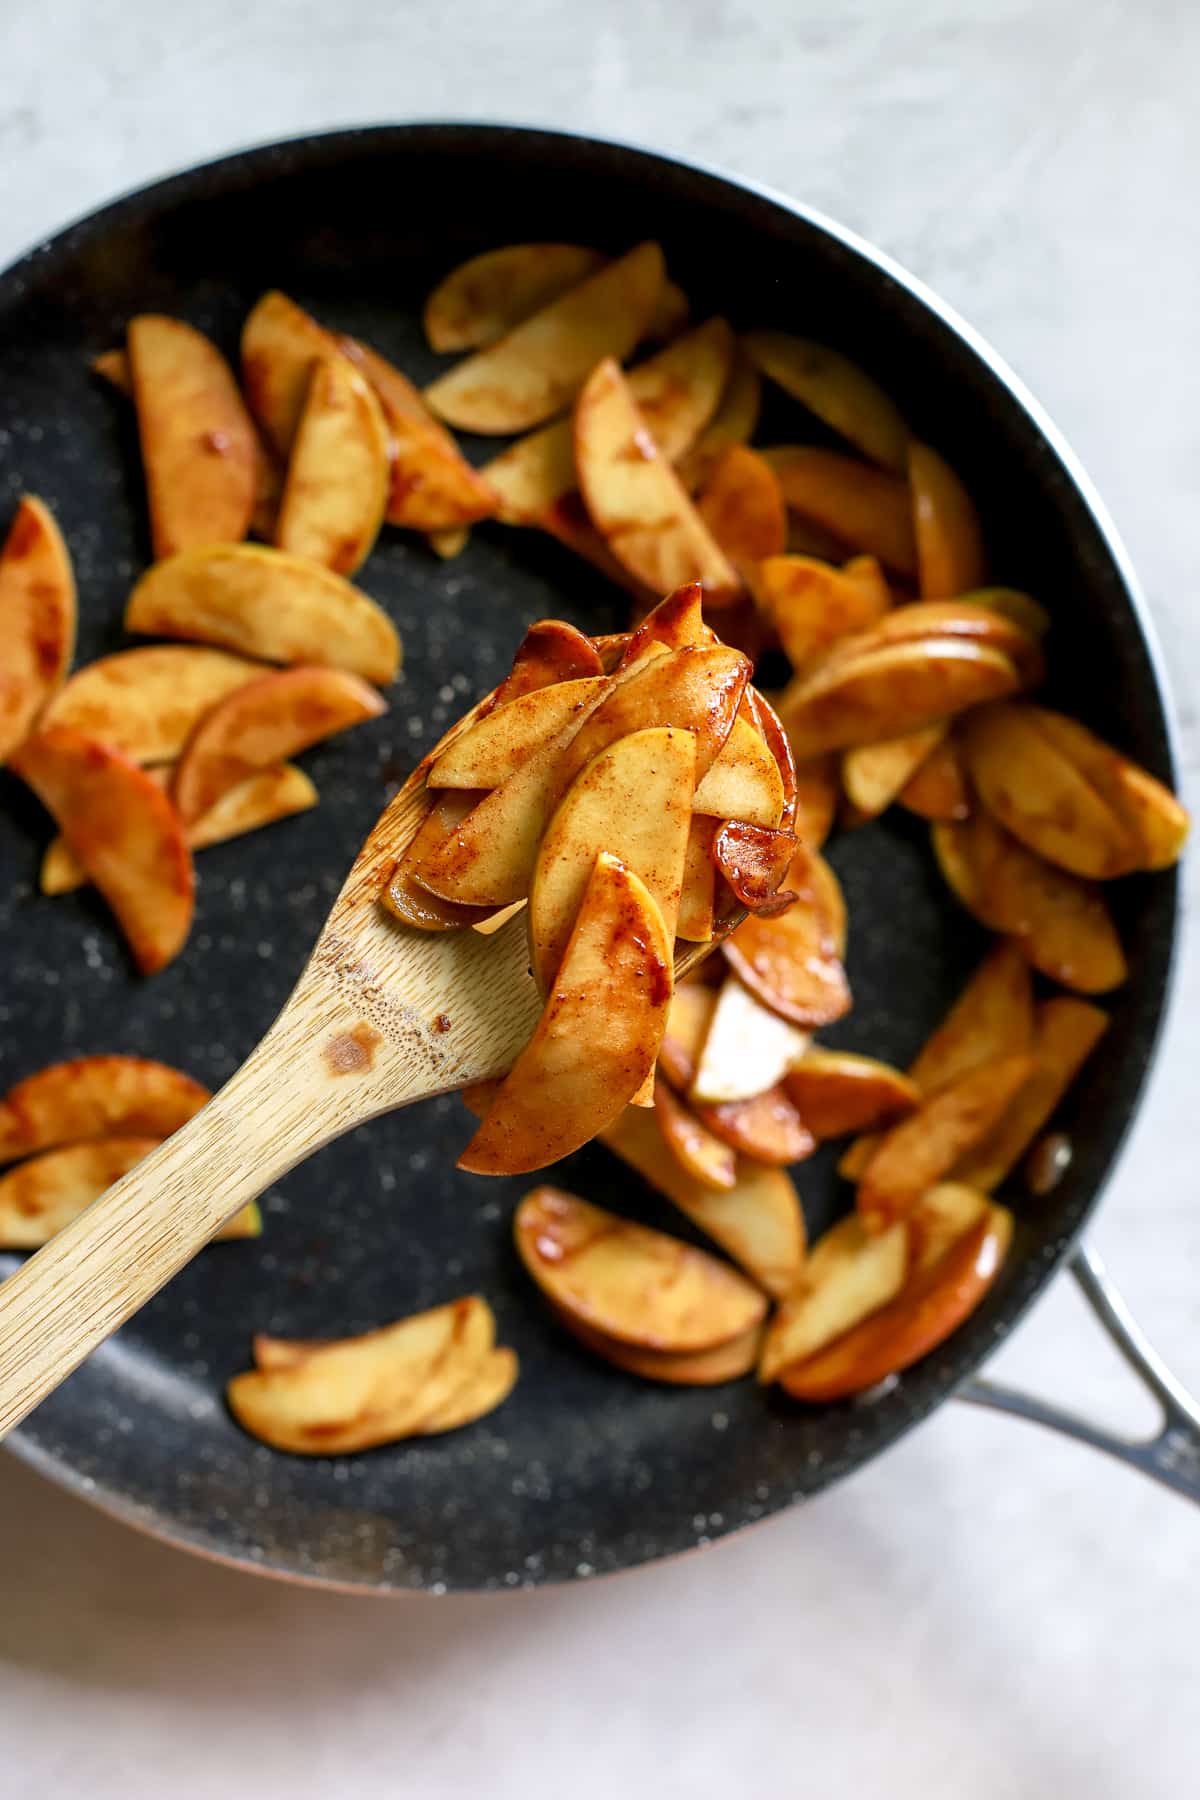 Wooden spoon full of simple sautéed apples, above sauté pan with more apples